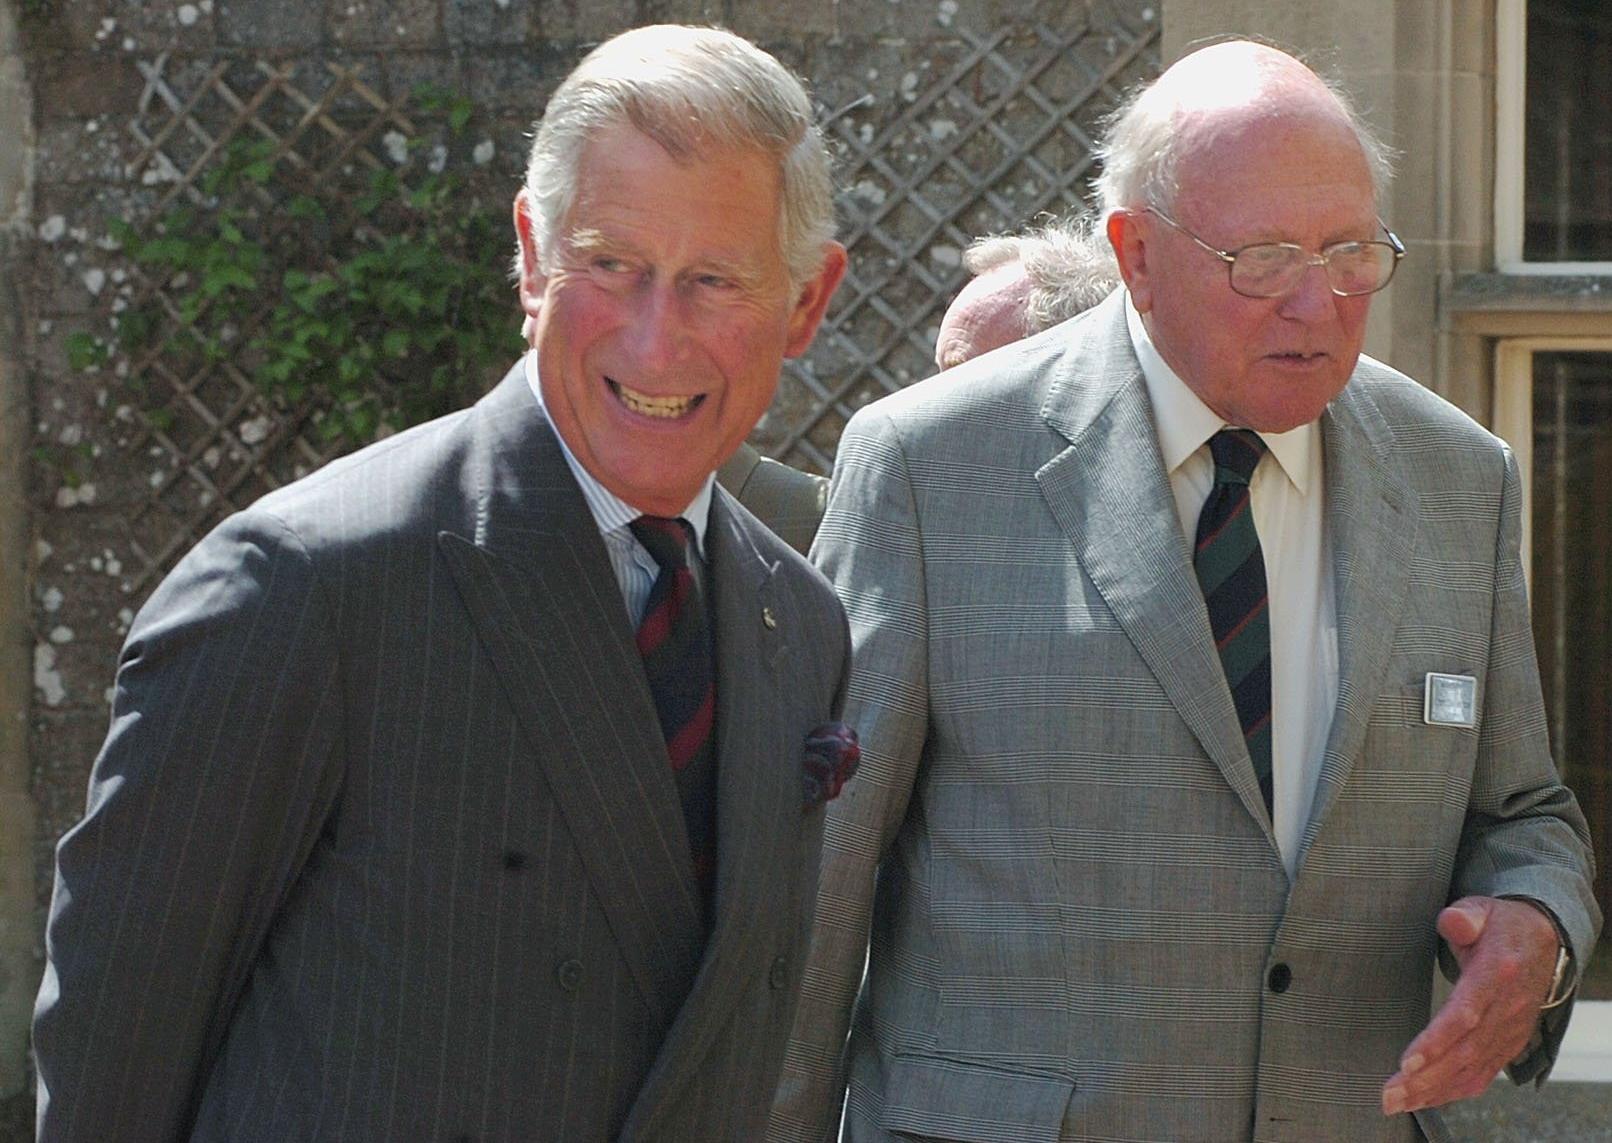 HRH The Duke of Rothesay visits Abbotsford House. Prince Charles was taken round  the house by head guide Larry Furlong then showed around the walled gardens by head gardener Billy Hughes.